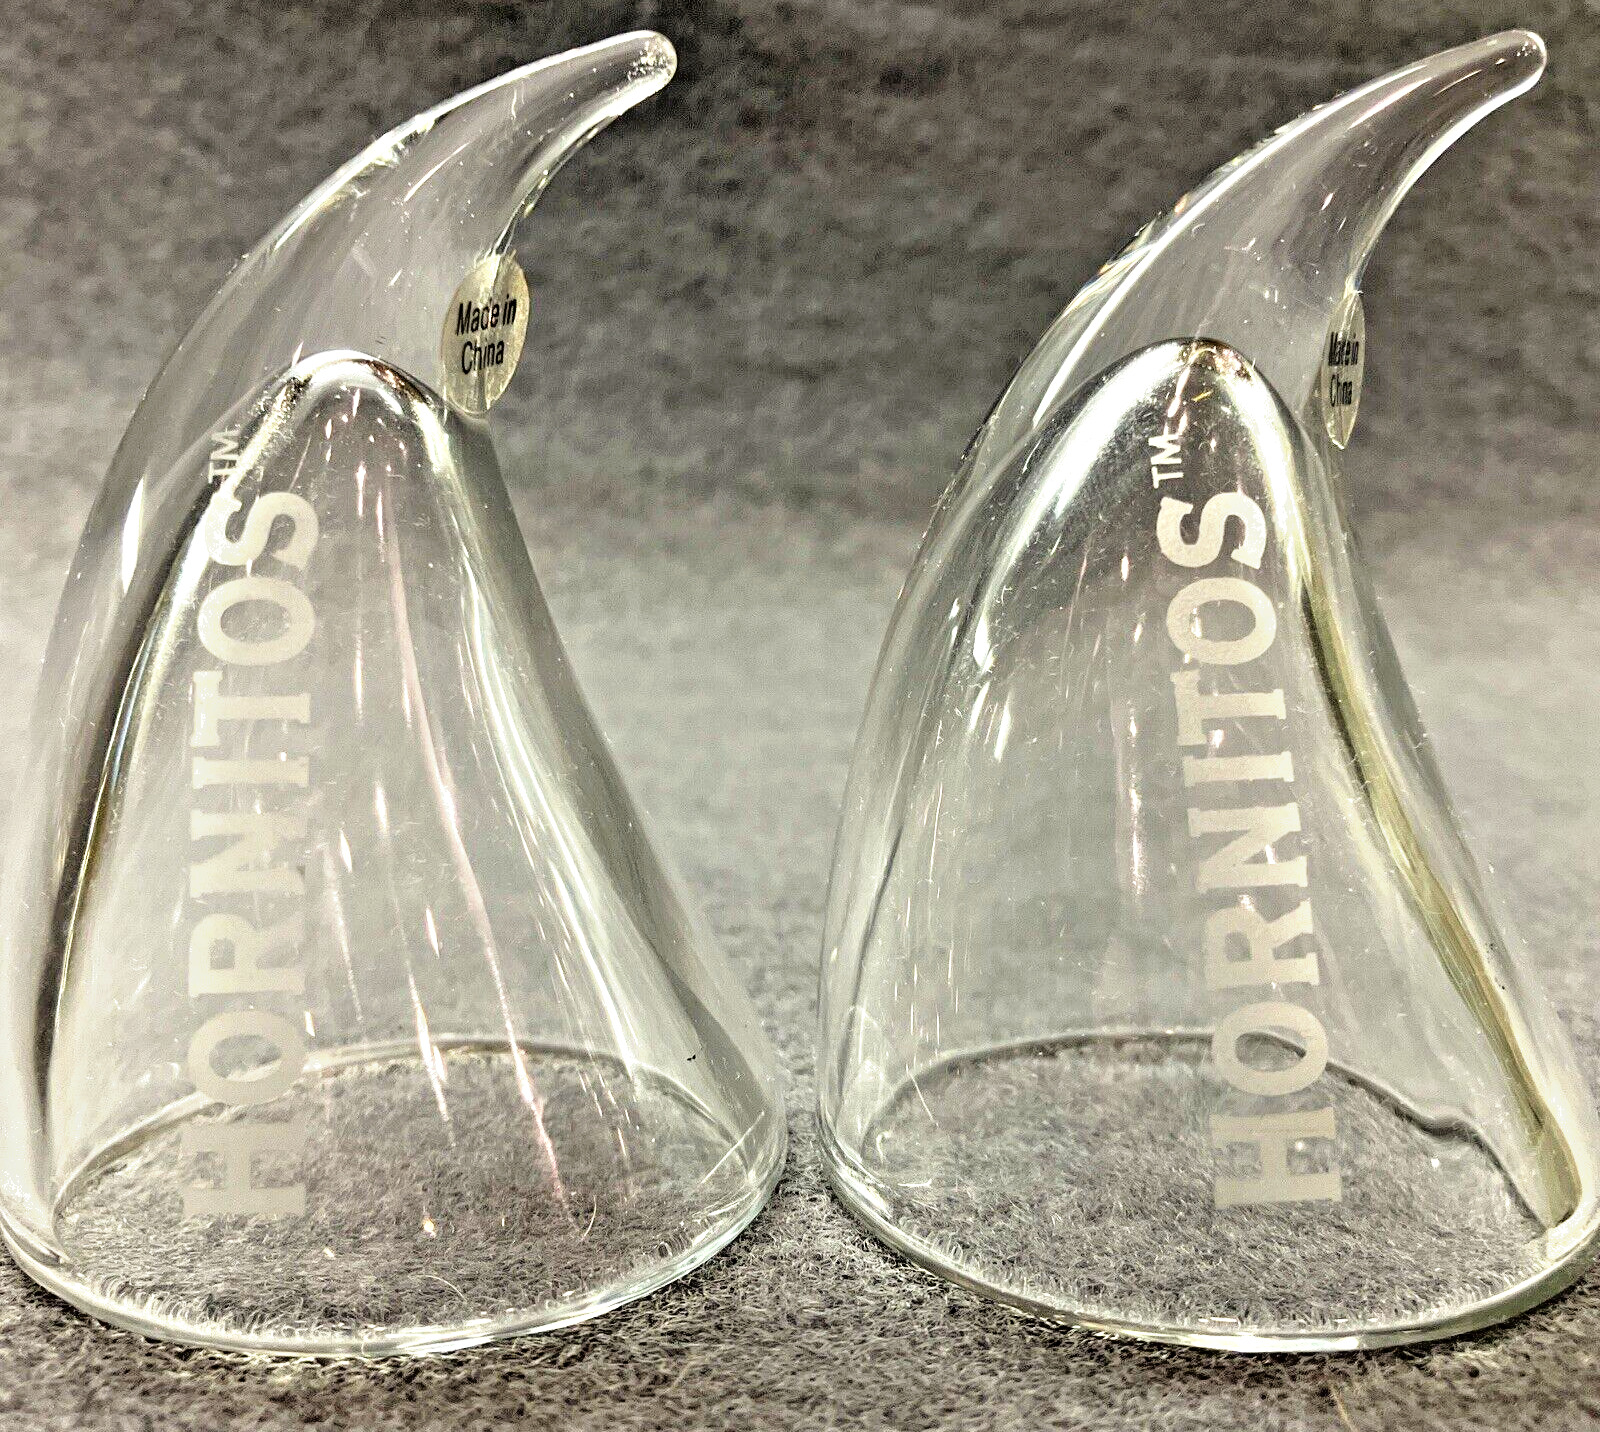 Hornitos Tequila Shot Glasses Unique Horn Shape Etched Logo Collectible Set of 6